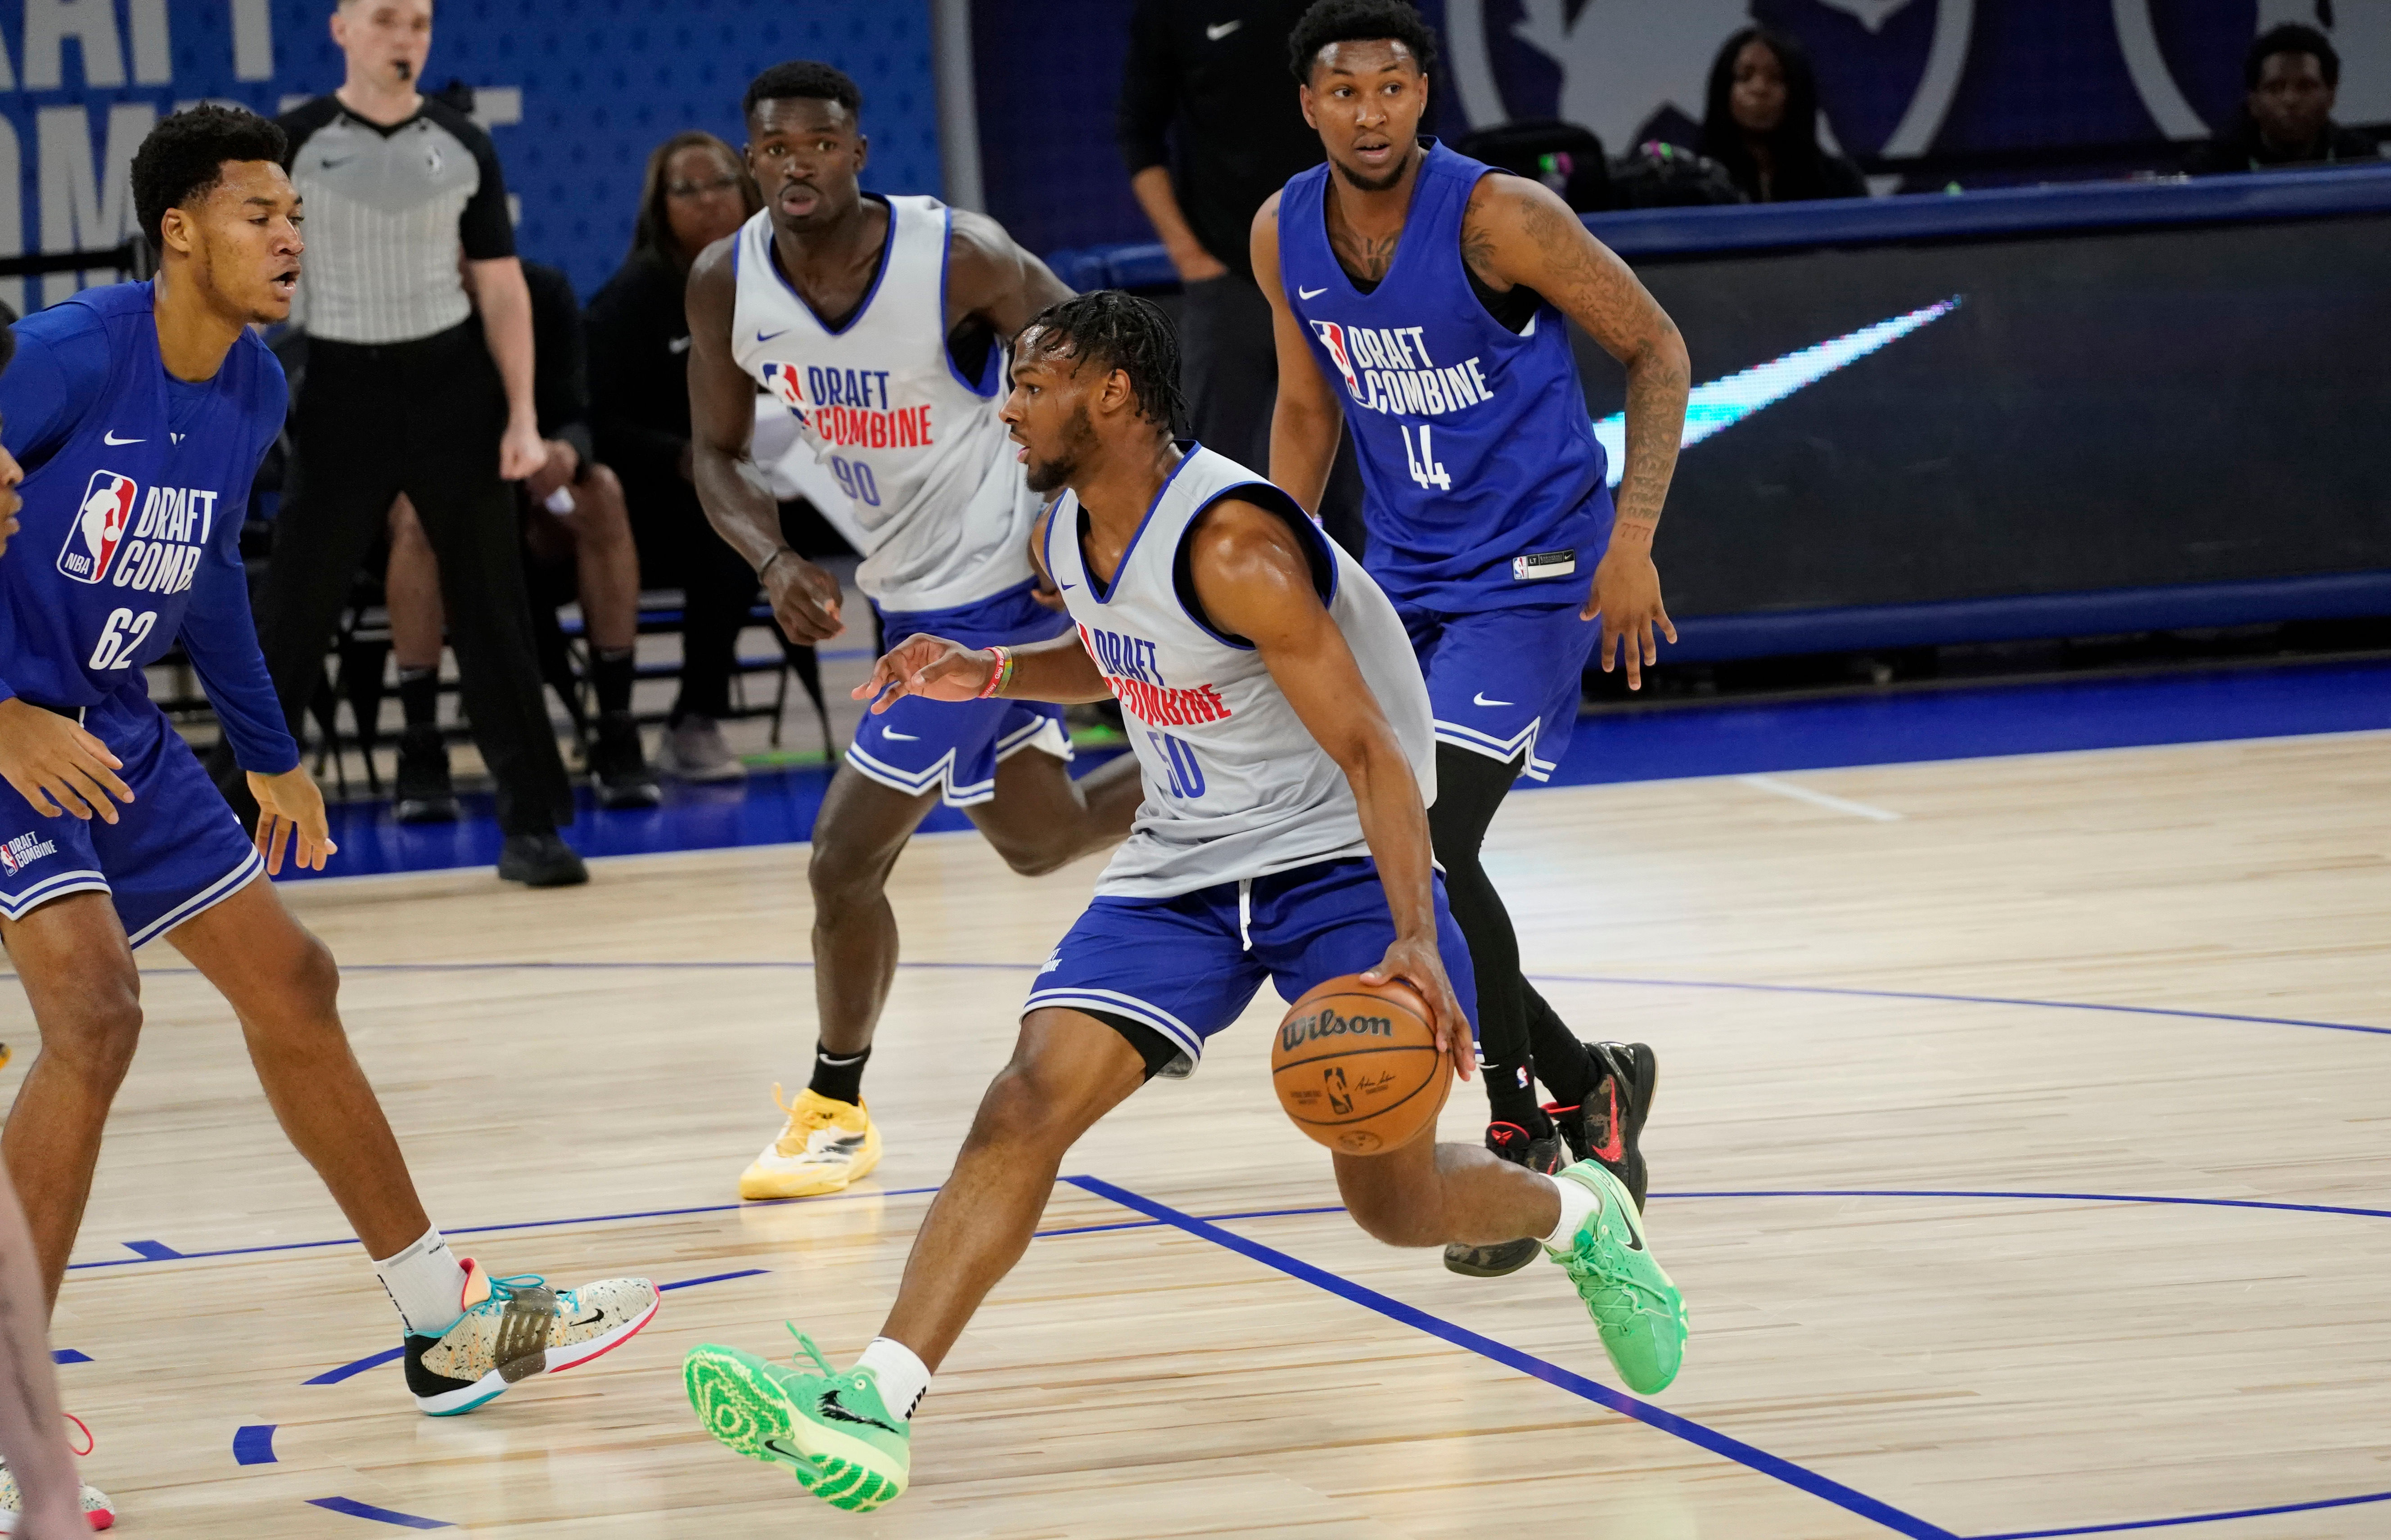 Bronny James dribbles the ball on the second day of the NBA Draft Combine scrimmage on Wednesday.